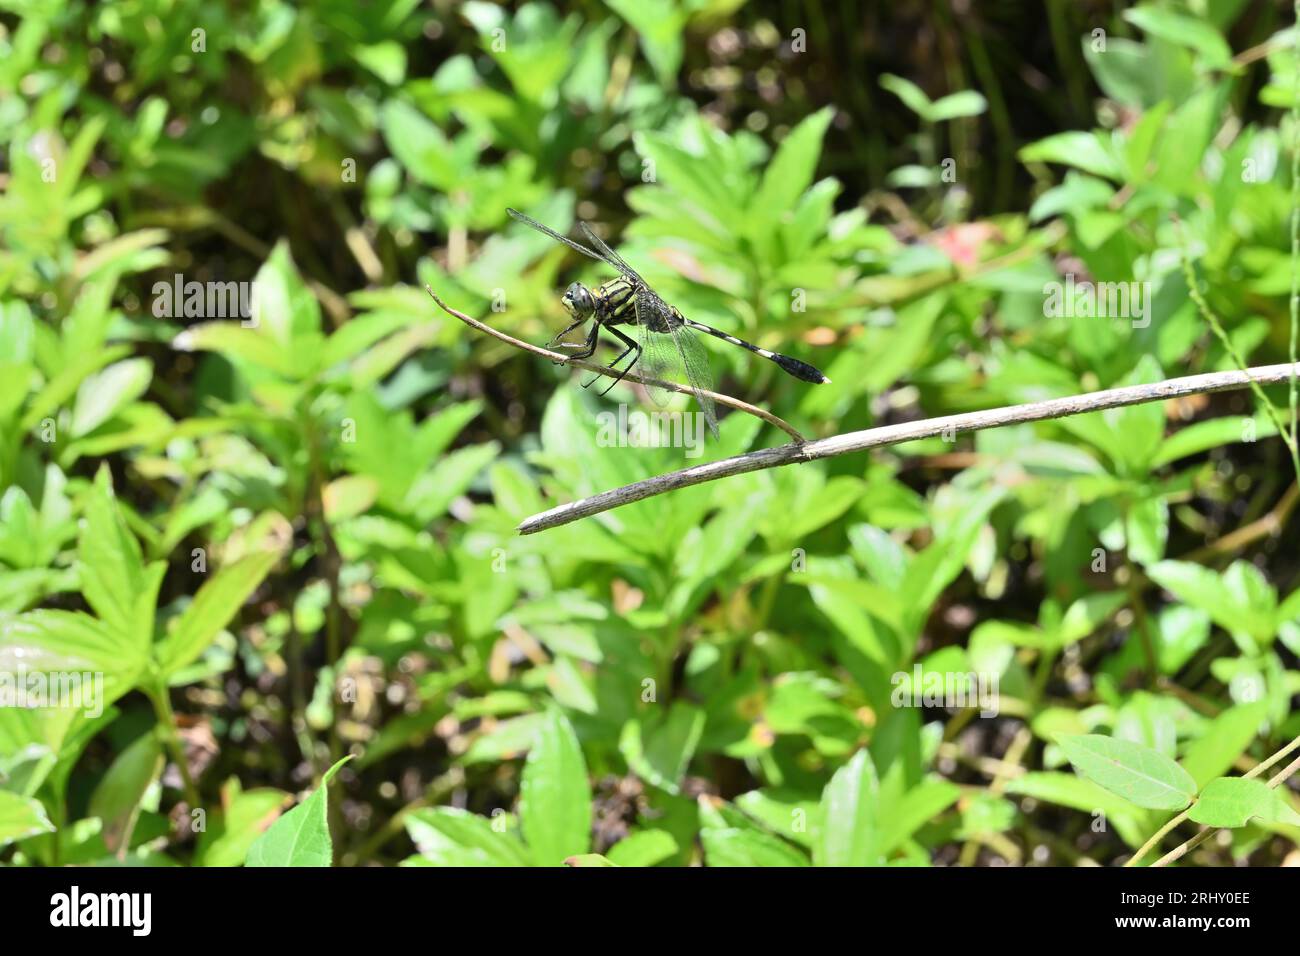 Side view of a Green Marsh Hawk dragonfly (Orthetrum Sabina) sitting on a dry stem in a lawn area Stock Photo